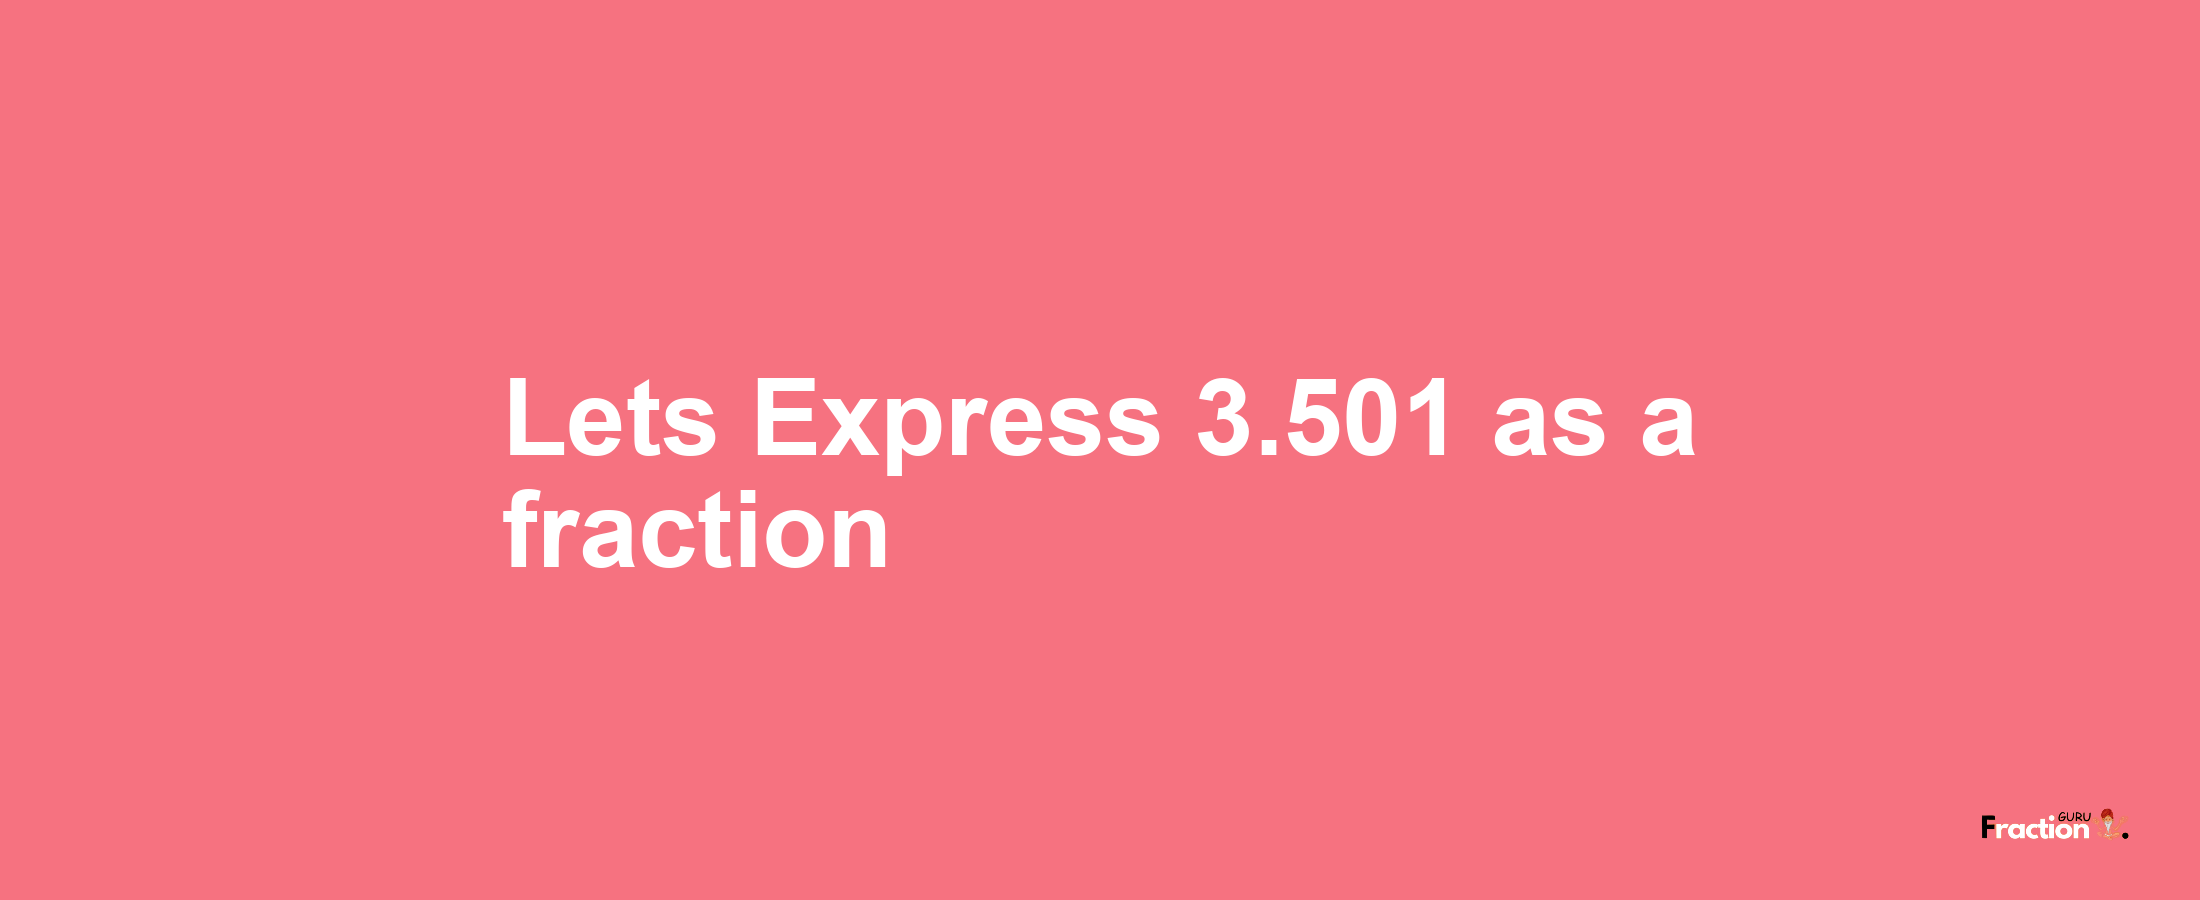 Lets Express 3.501 as afraction